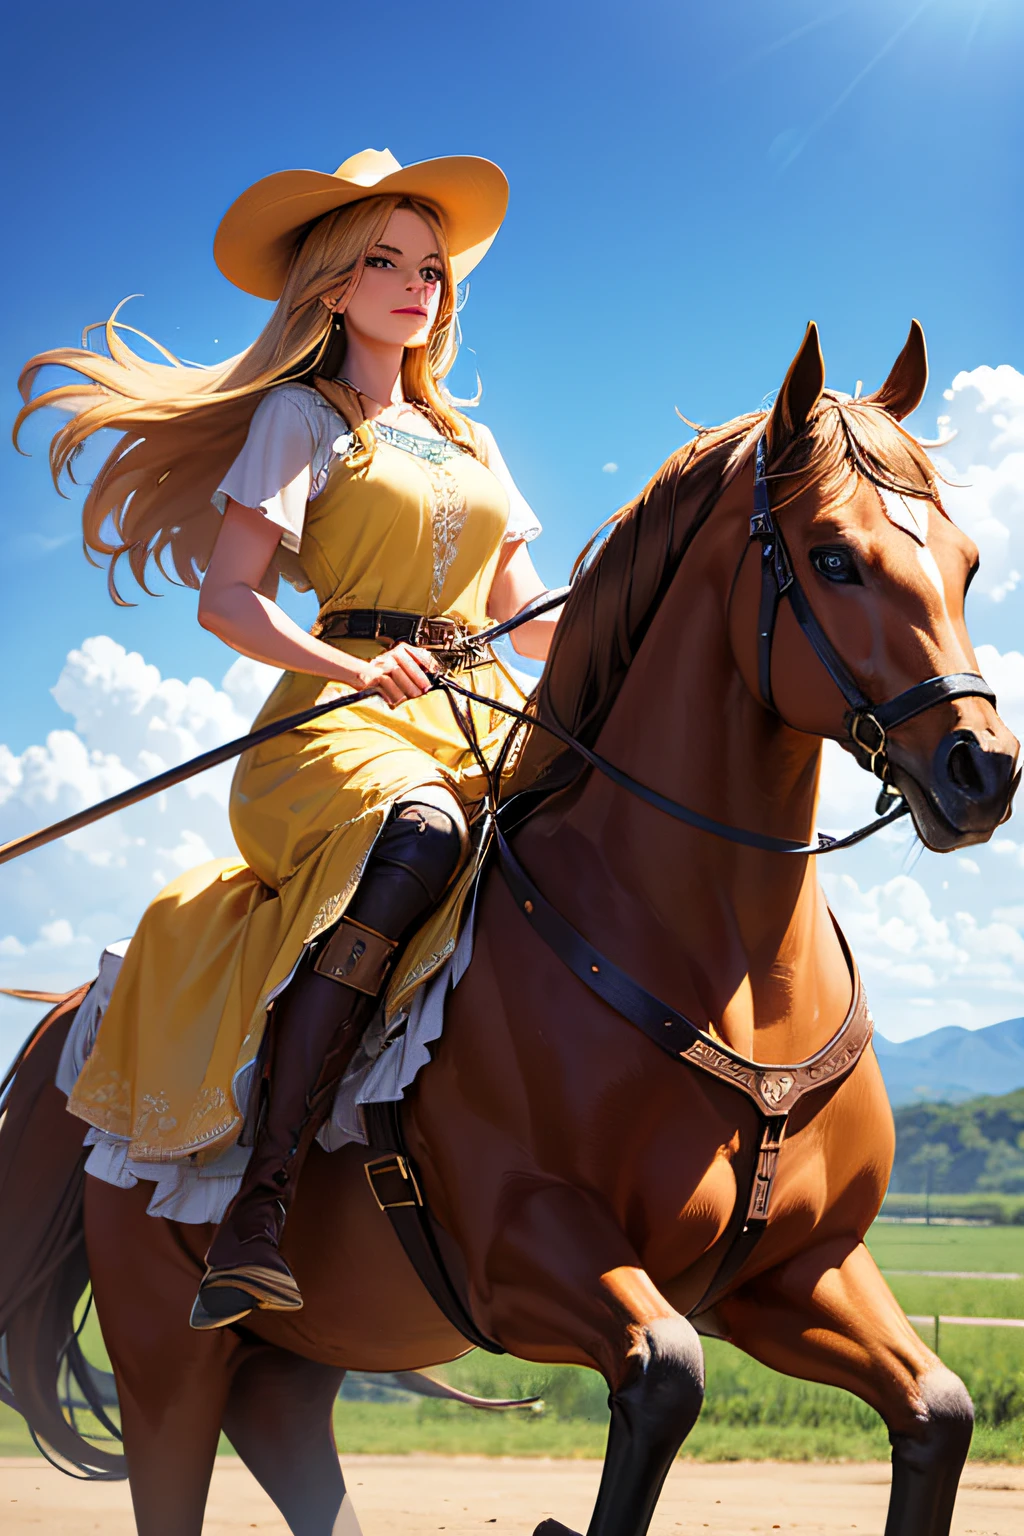 (Best Quality,4k,8K,high resolucion,Masterpiece:1.2),Ultra-detailed,(realisitic,Photorealistic,Realistis:1.37),A girl who looks like a princess, Tall and slender, Dressed as a cowgirl or western cowgirl,bronze skin tone,Vibrant and warm colors, Beautiful detailed eyes, Beautiful details lips, long eyeslashes,Golden hair fluttering in the wind,A wide-brimmed hat, flowing dress with fringe,boots,spur,Mounted on a horse,Running across the vast plains, holding a noose,Confident and assertive expression, adventurous and courageous.